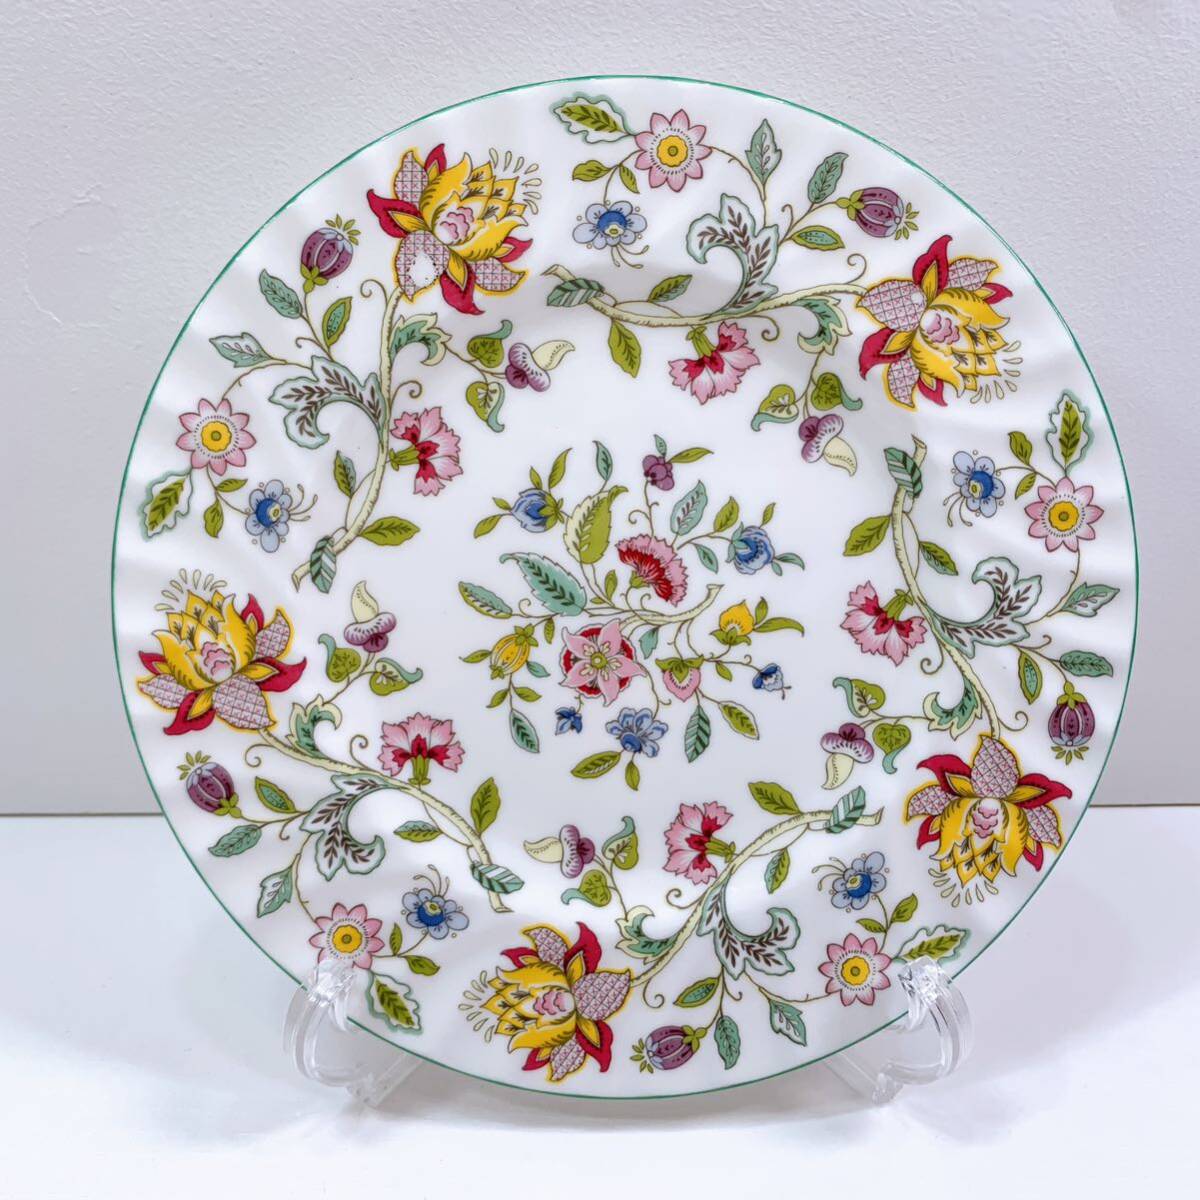 196[ used ]MINTON HADDON HALL Minton is Don hole green medium-sized dish plate 3 pieces set brand floral print bo-n tea ina Western-style tableware present condition goods 